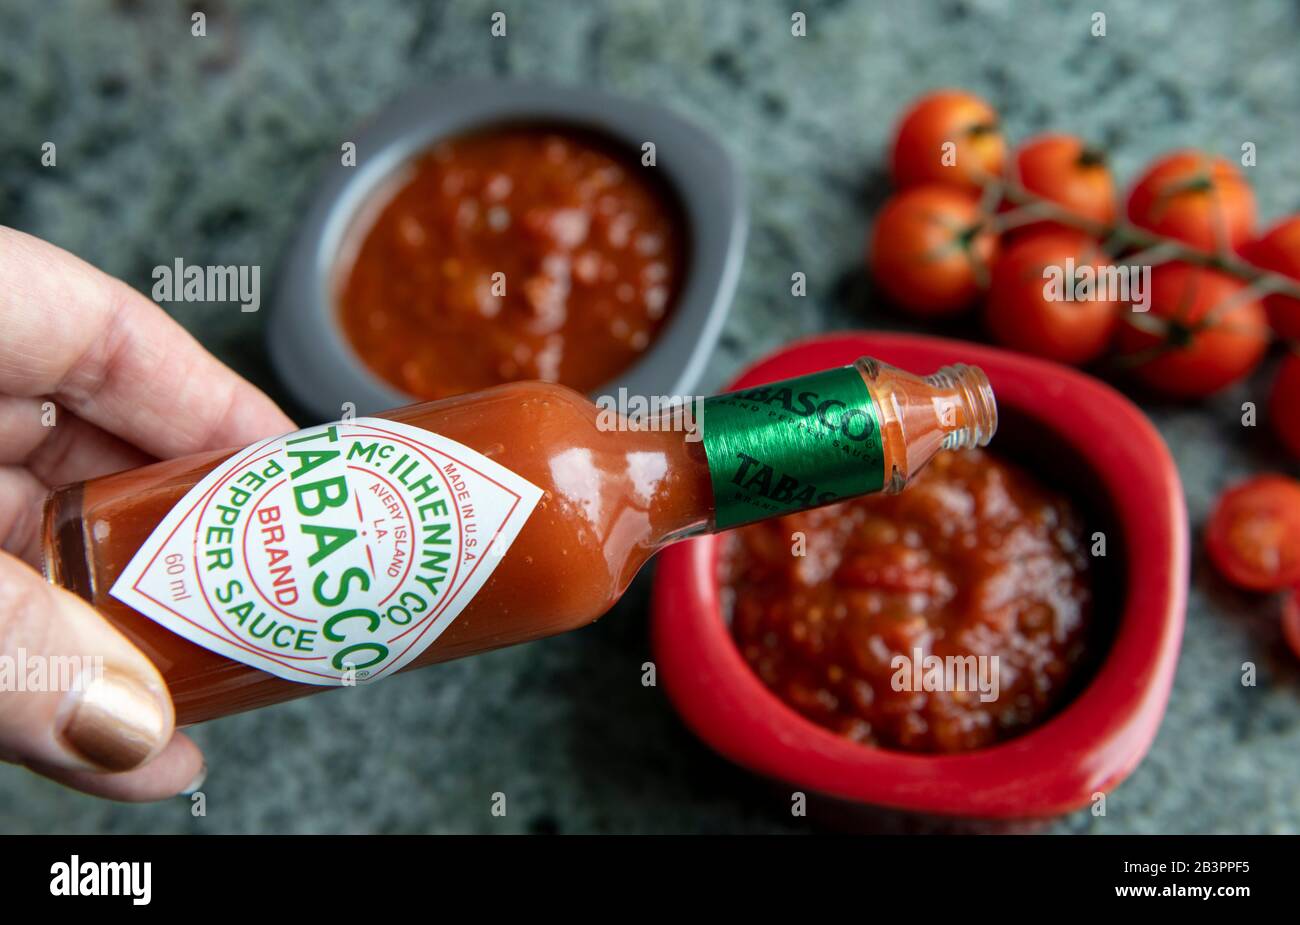 Spice up your salsa.Adding Tabasco Pepper sauce to tomato salsa.Hong Kong,China:05 Mar,2020. Stock Photo